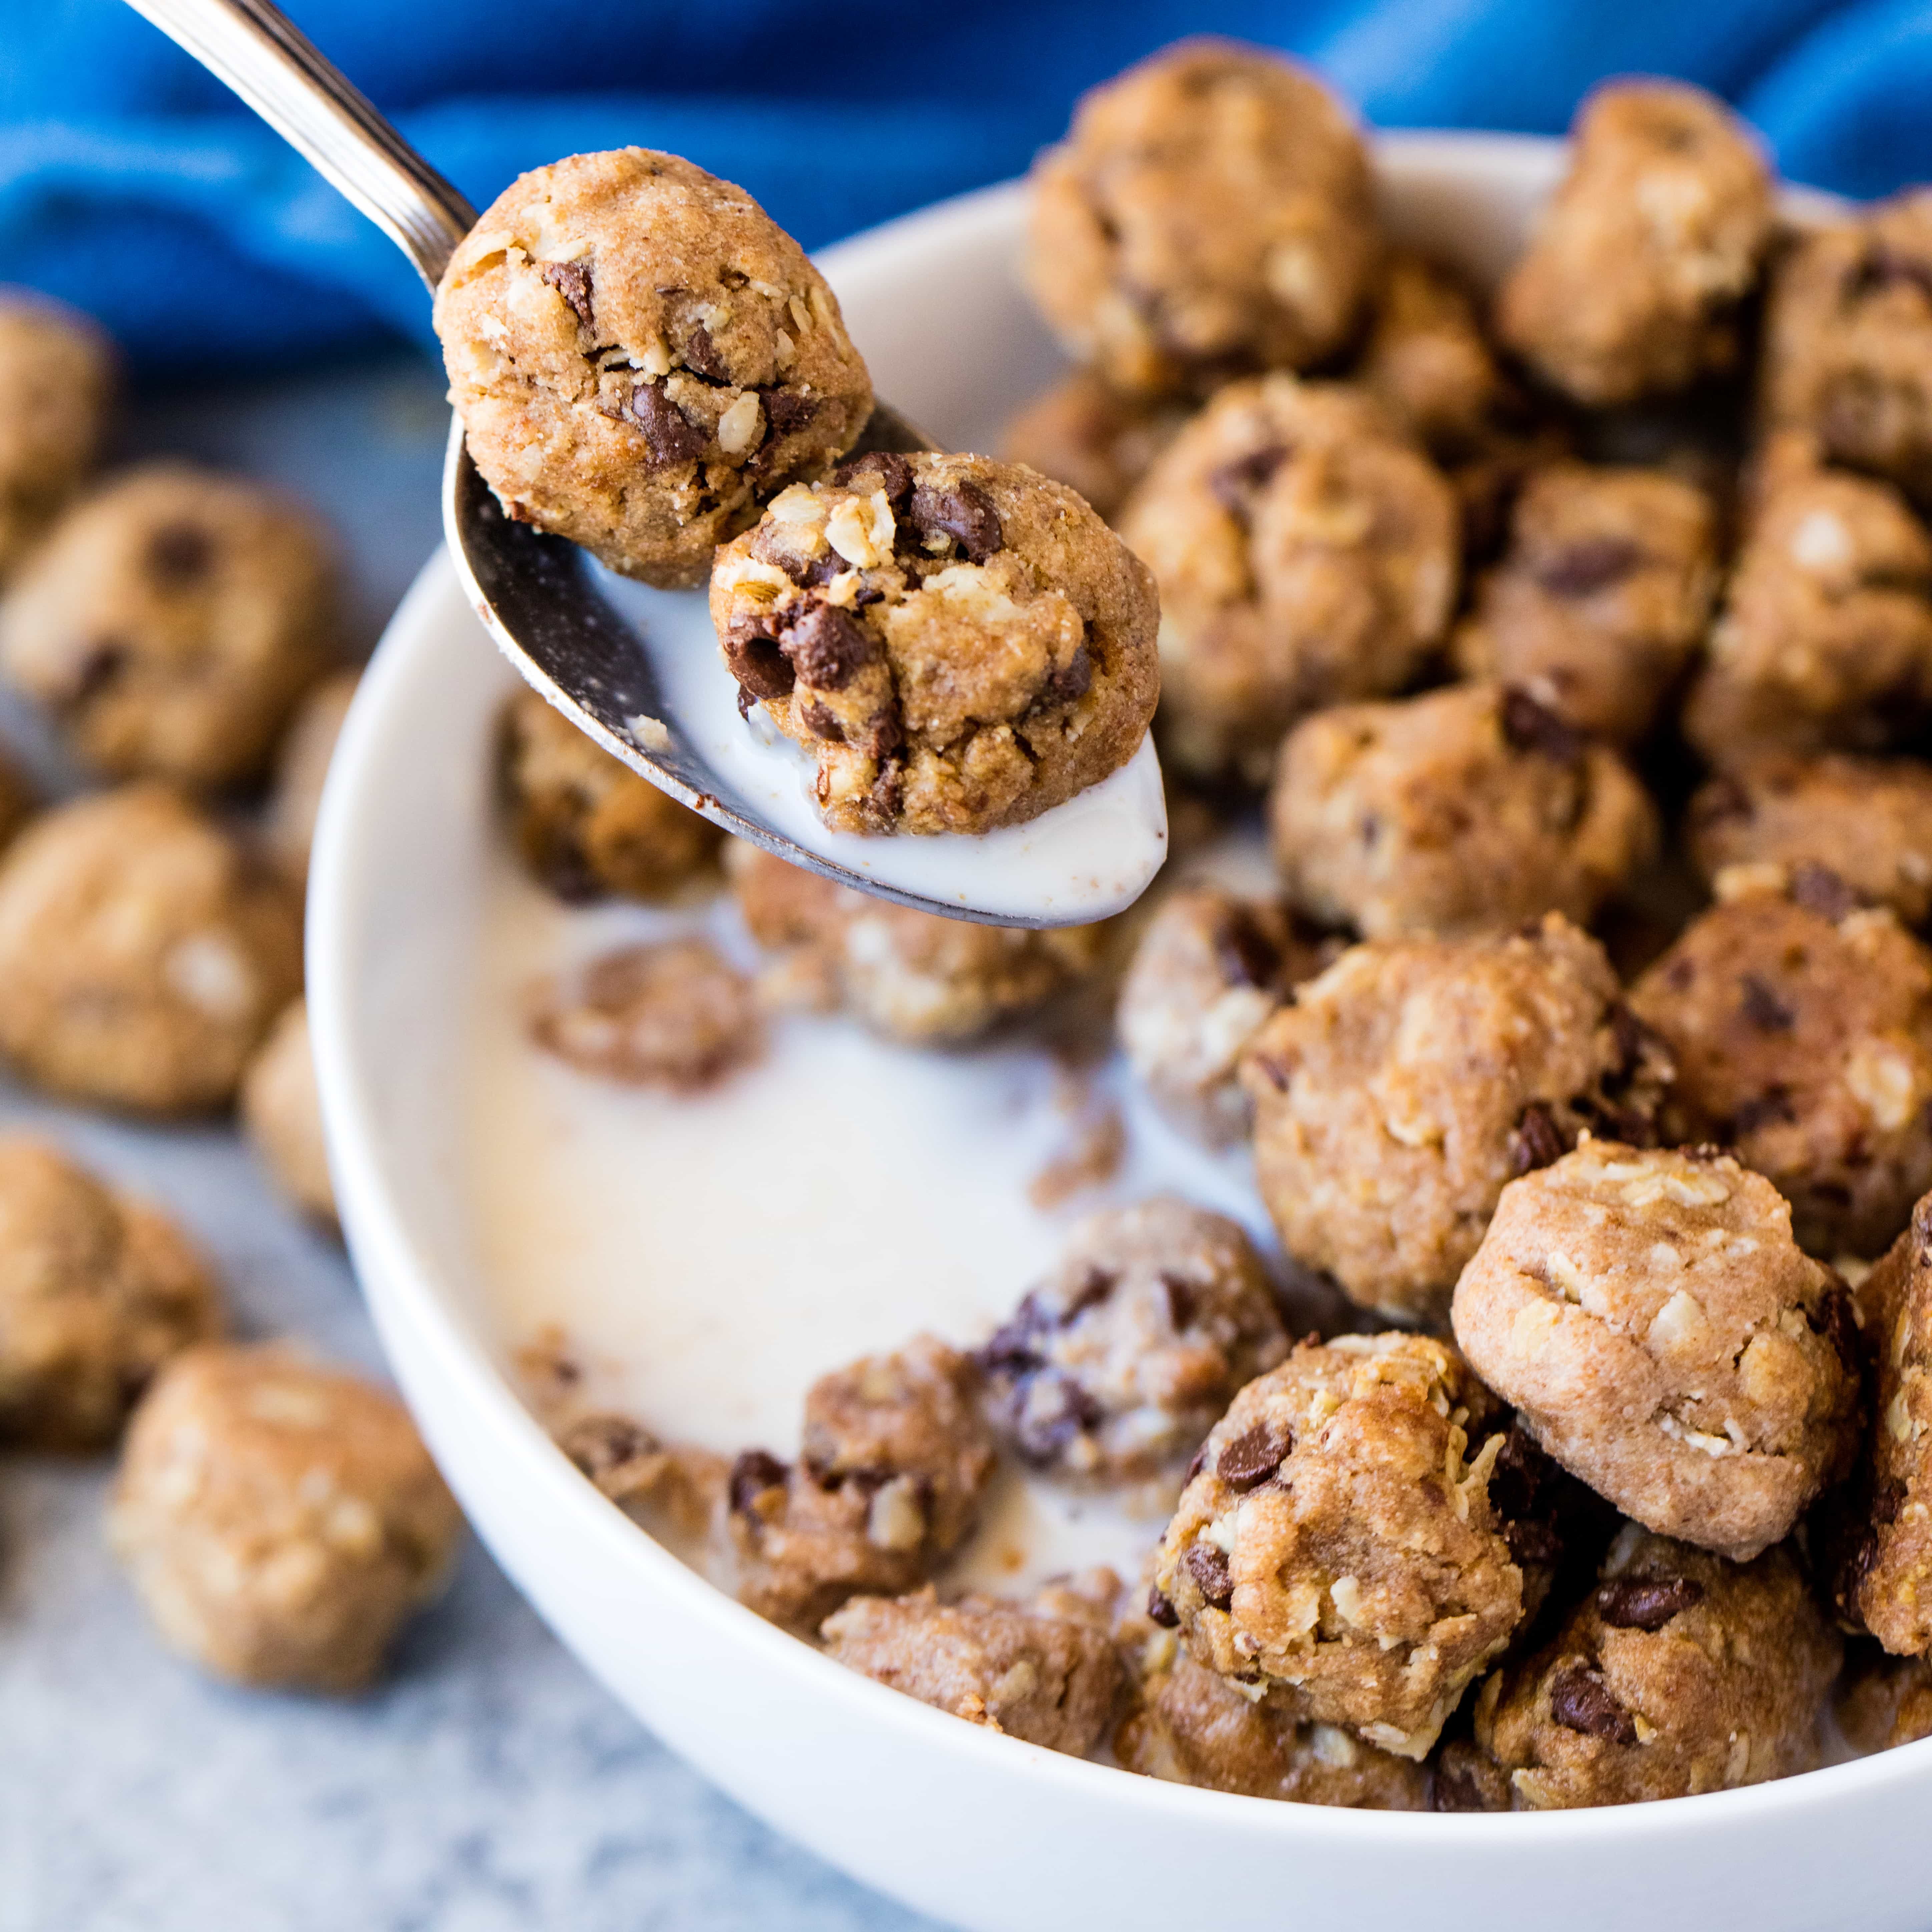 A spoonful of homemade cookie cereal and milk is taken from a bowl of cookie cereal